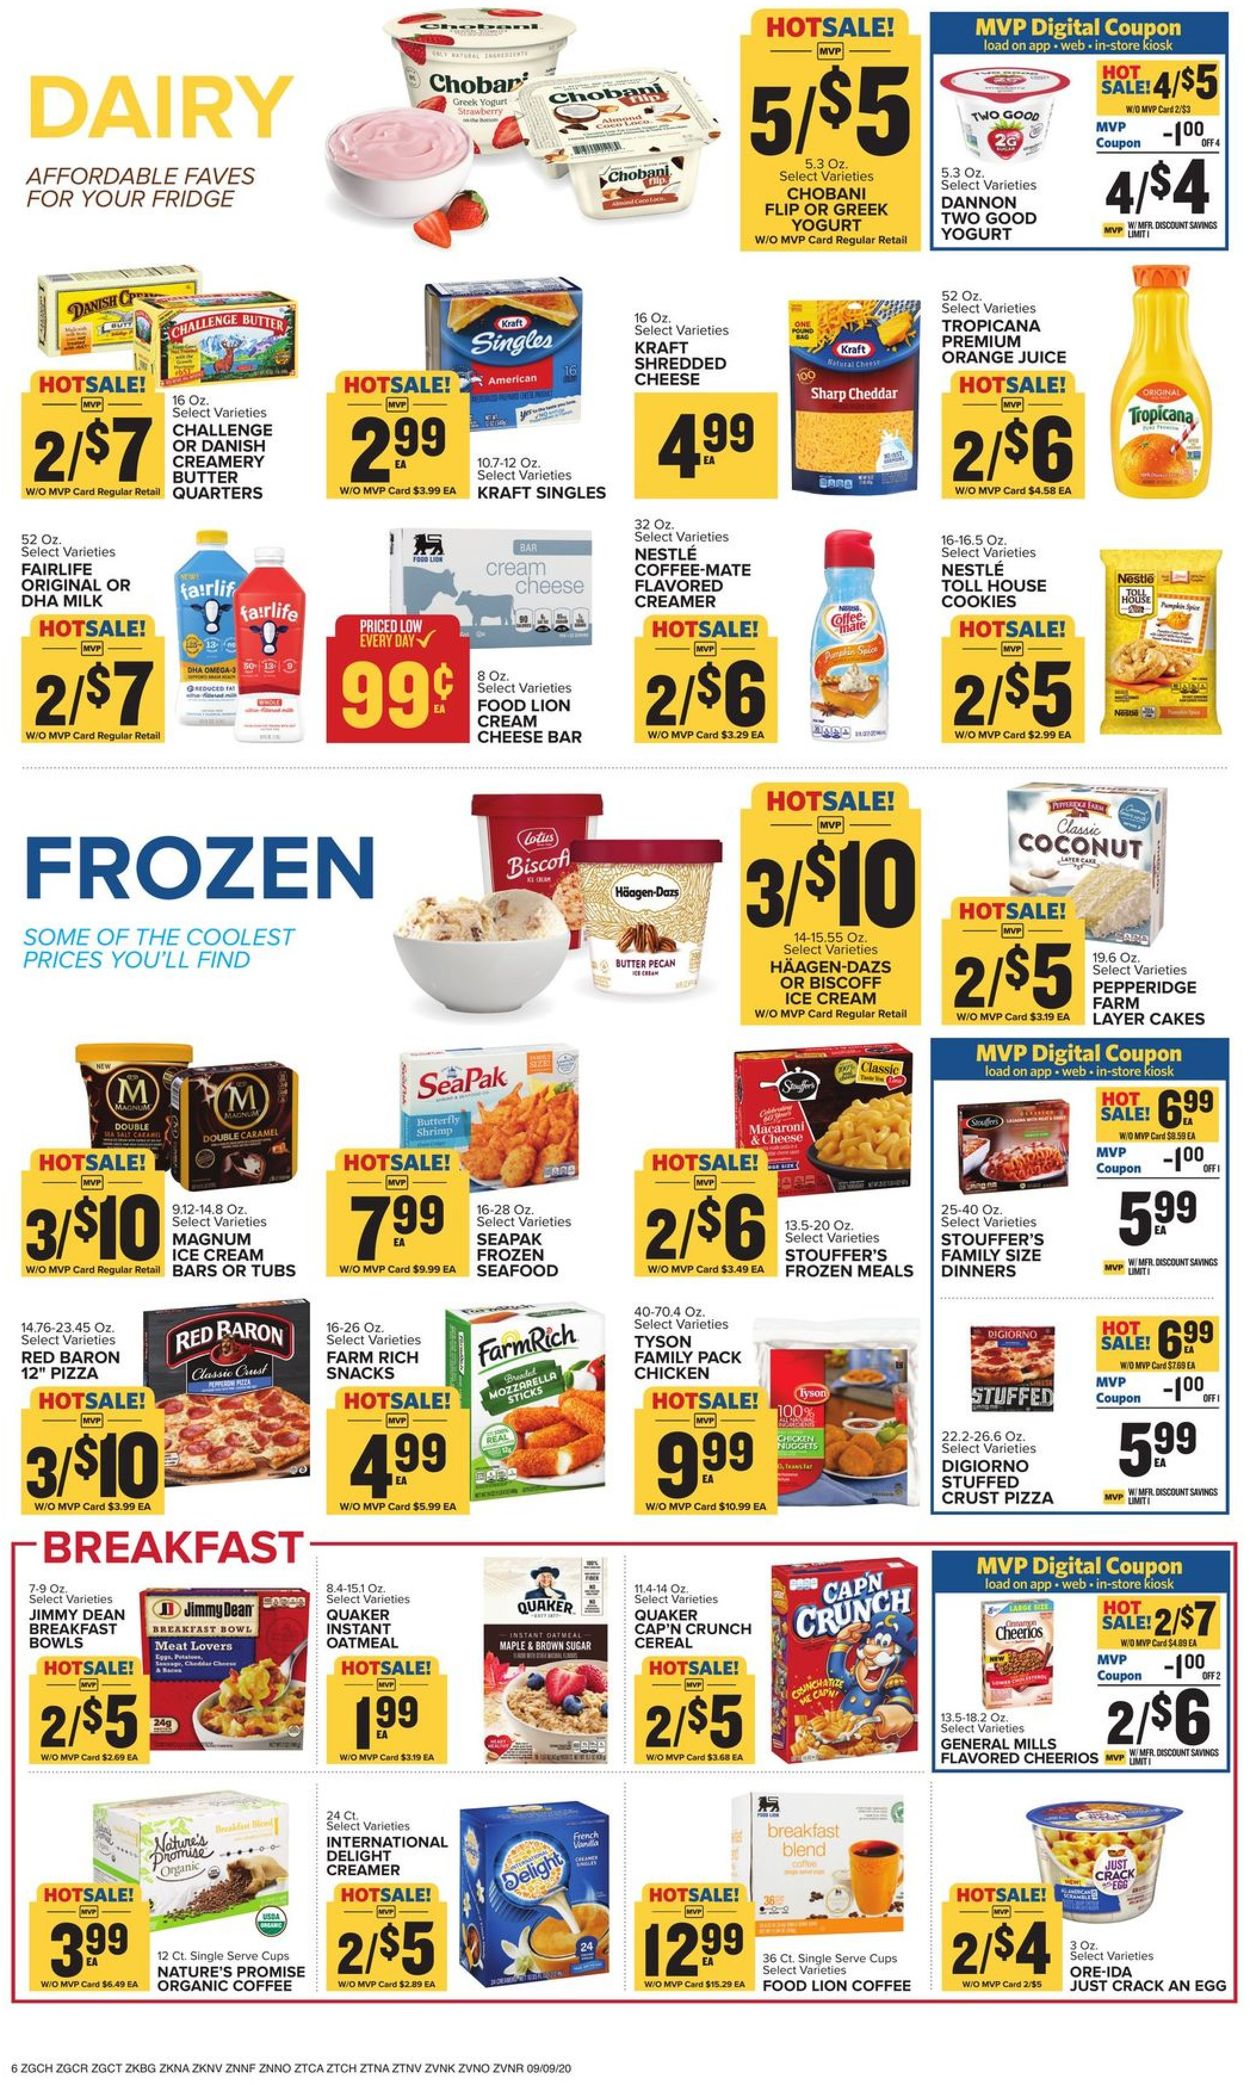 Catalogue Food Lion from 09/09/2020